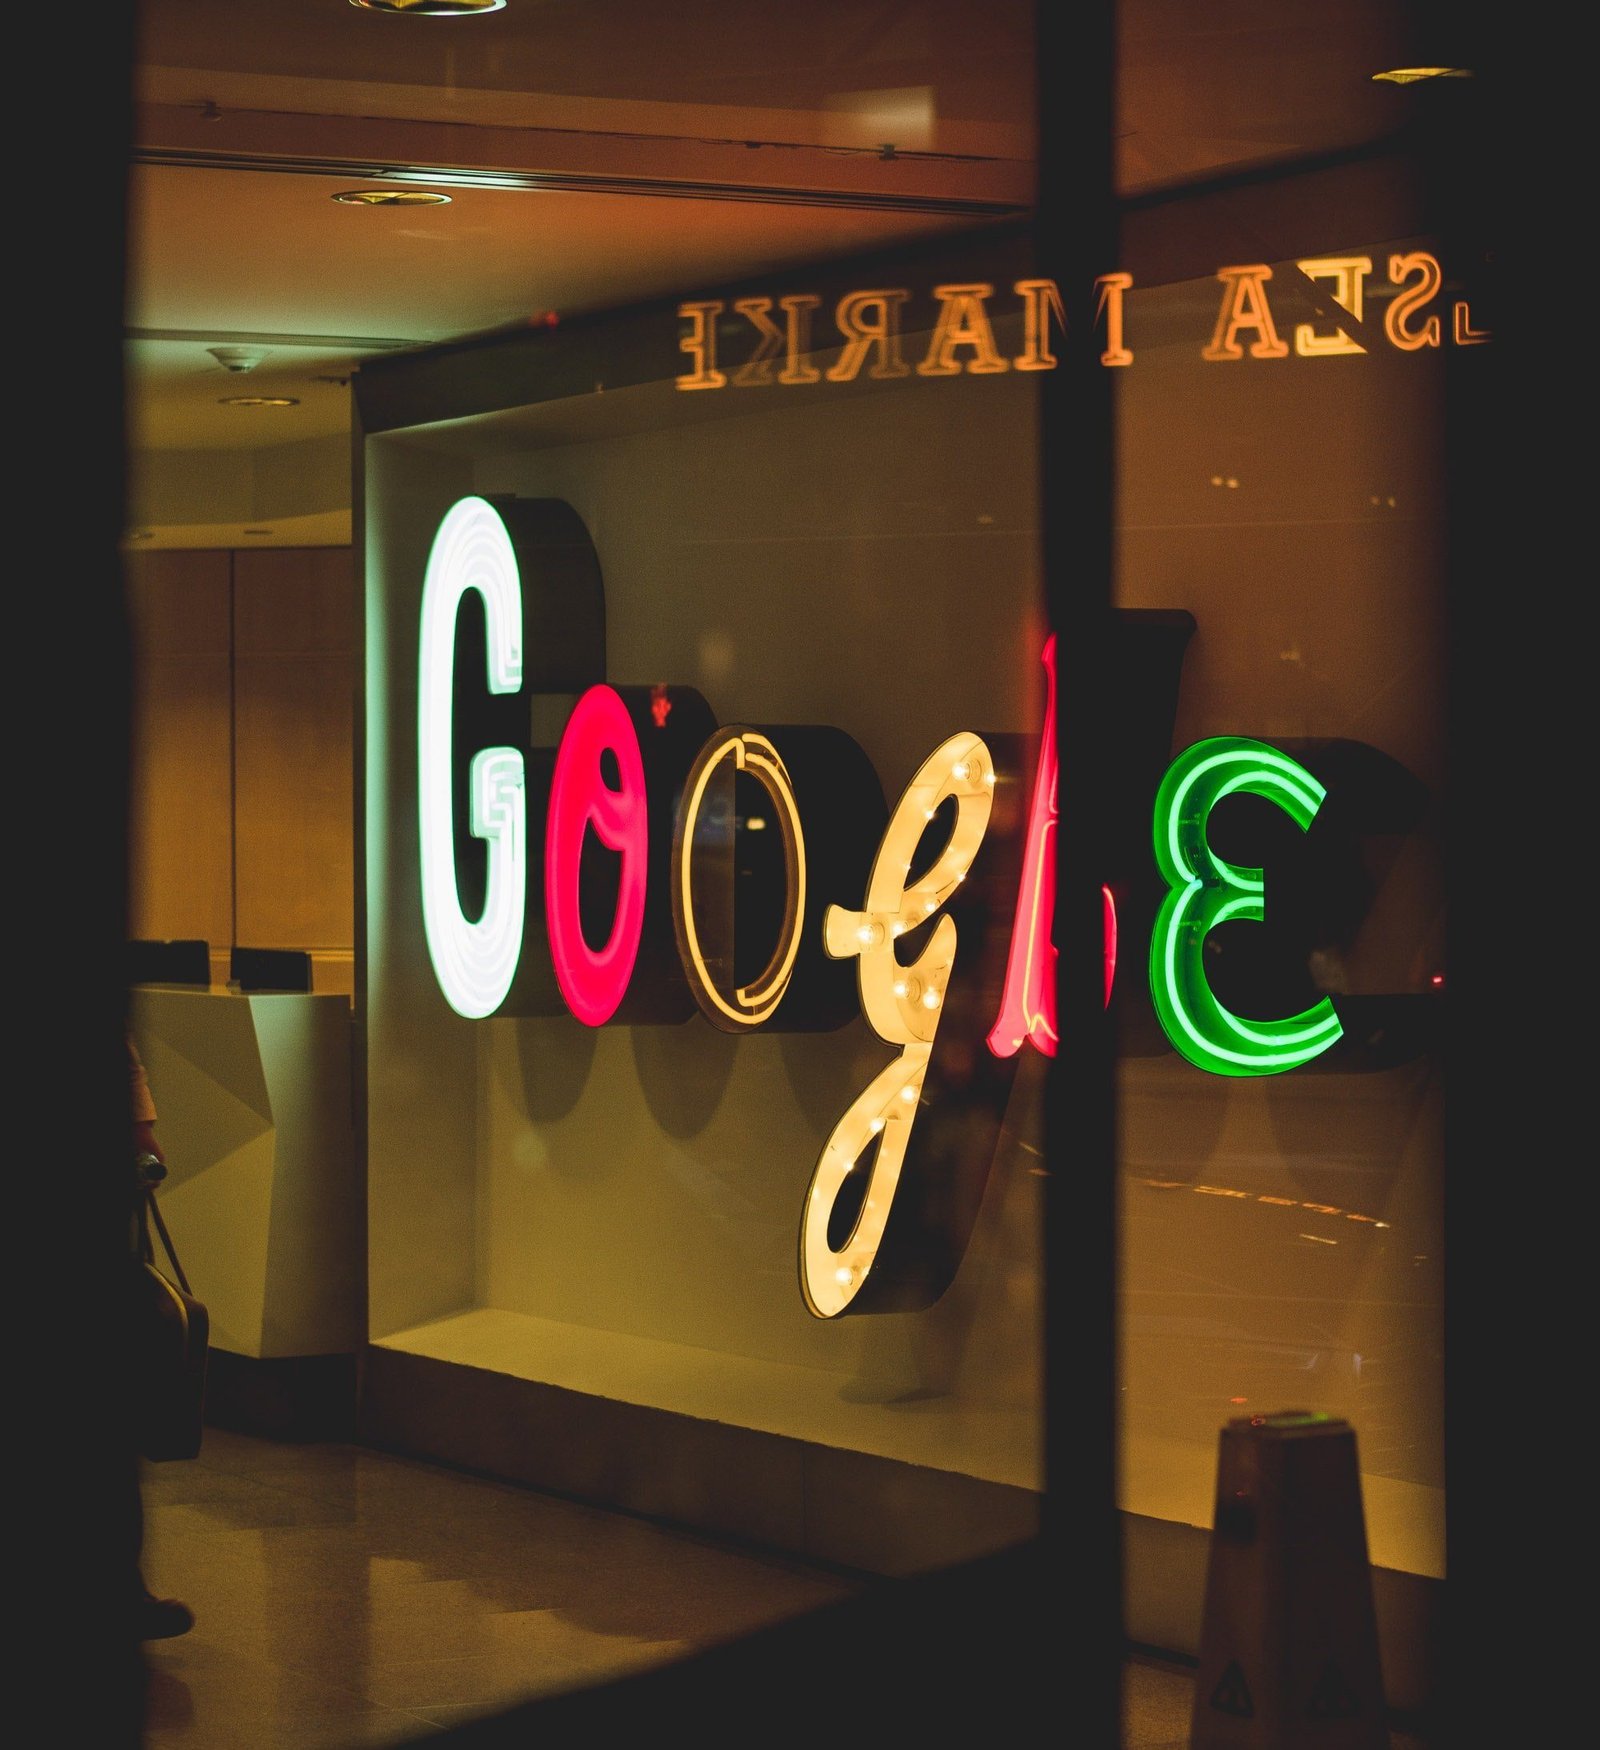 Neon Google sign in an office building